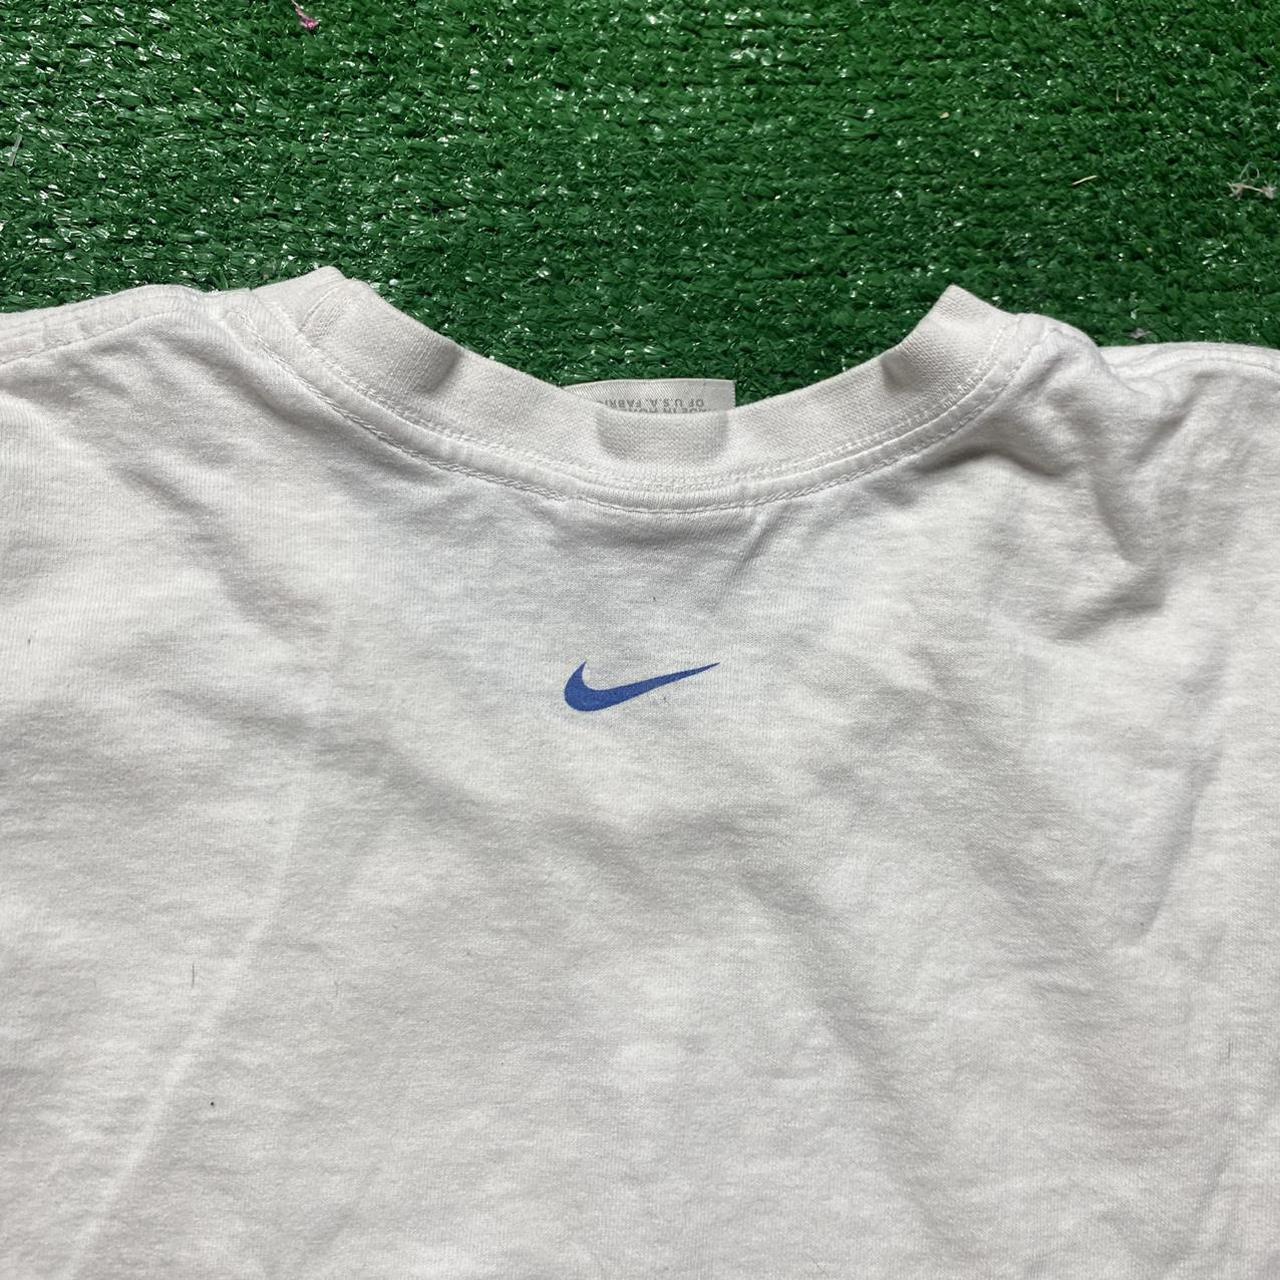 Product Image 3 - y2k nike shirt. no stains